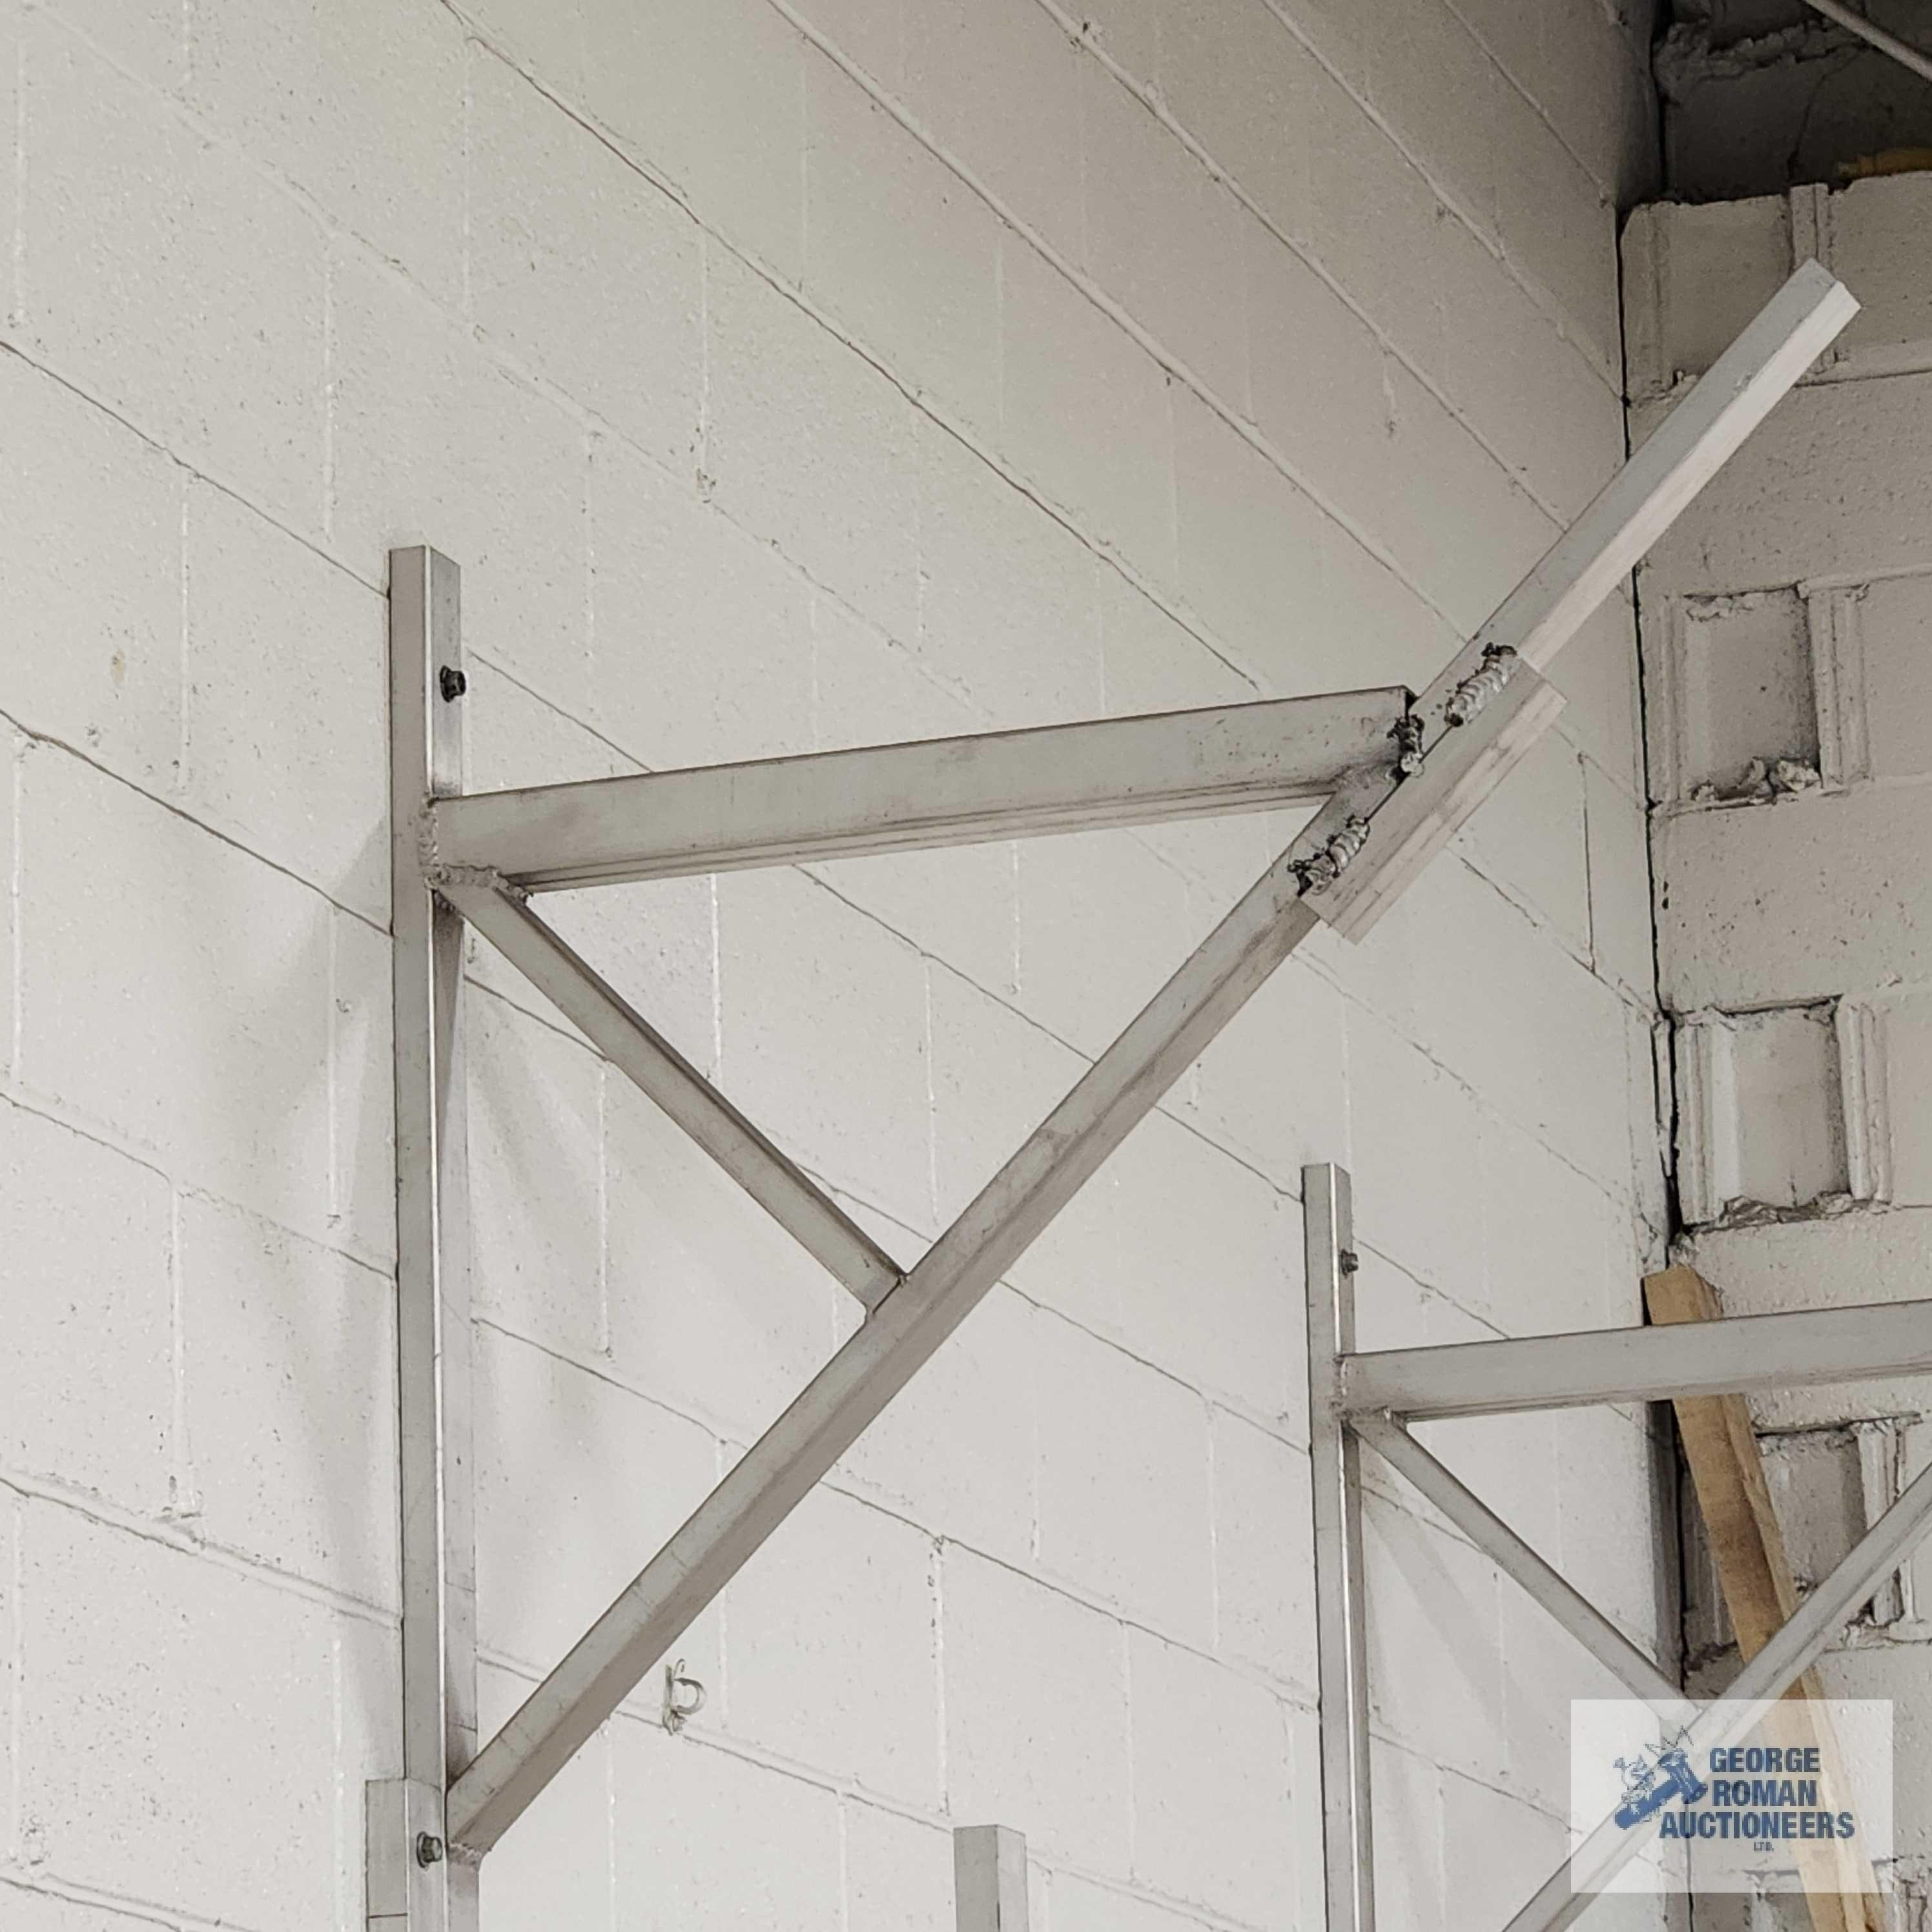 Four aluminum wall brackets with angle stops